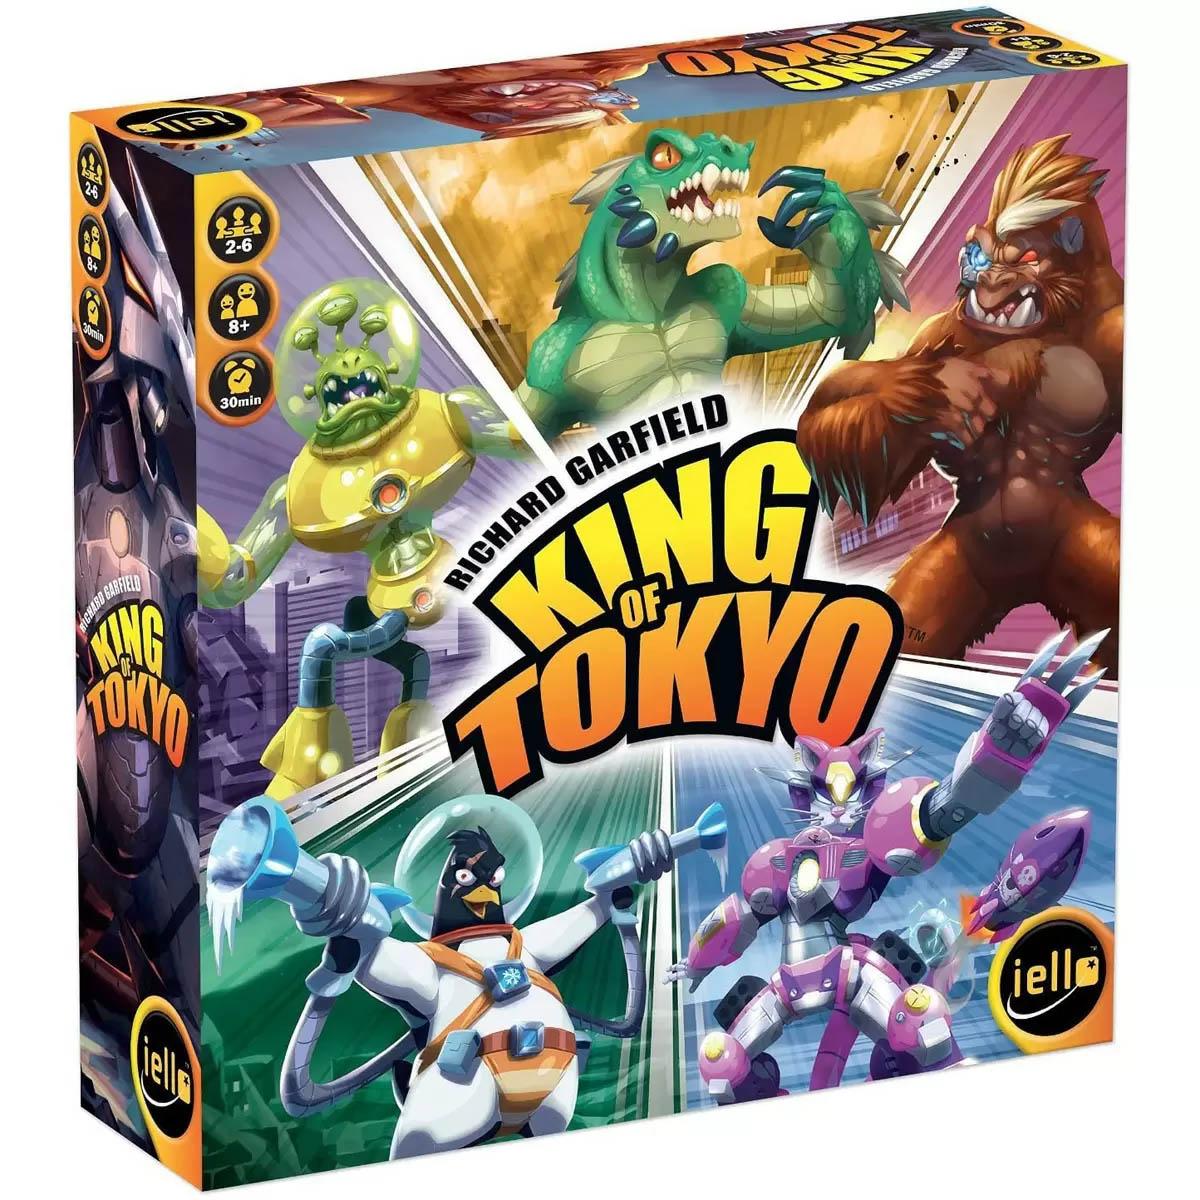 King of Tokyo New Edition Board Game for $23.49